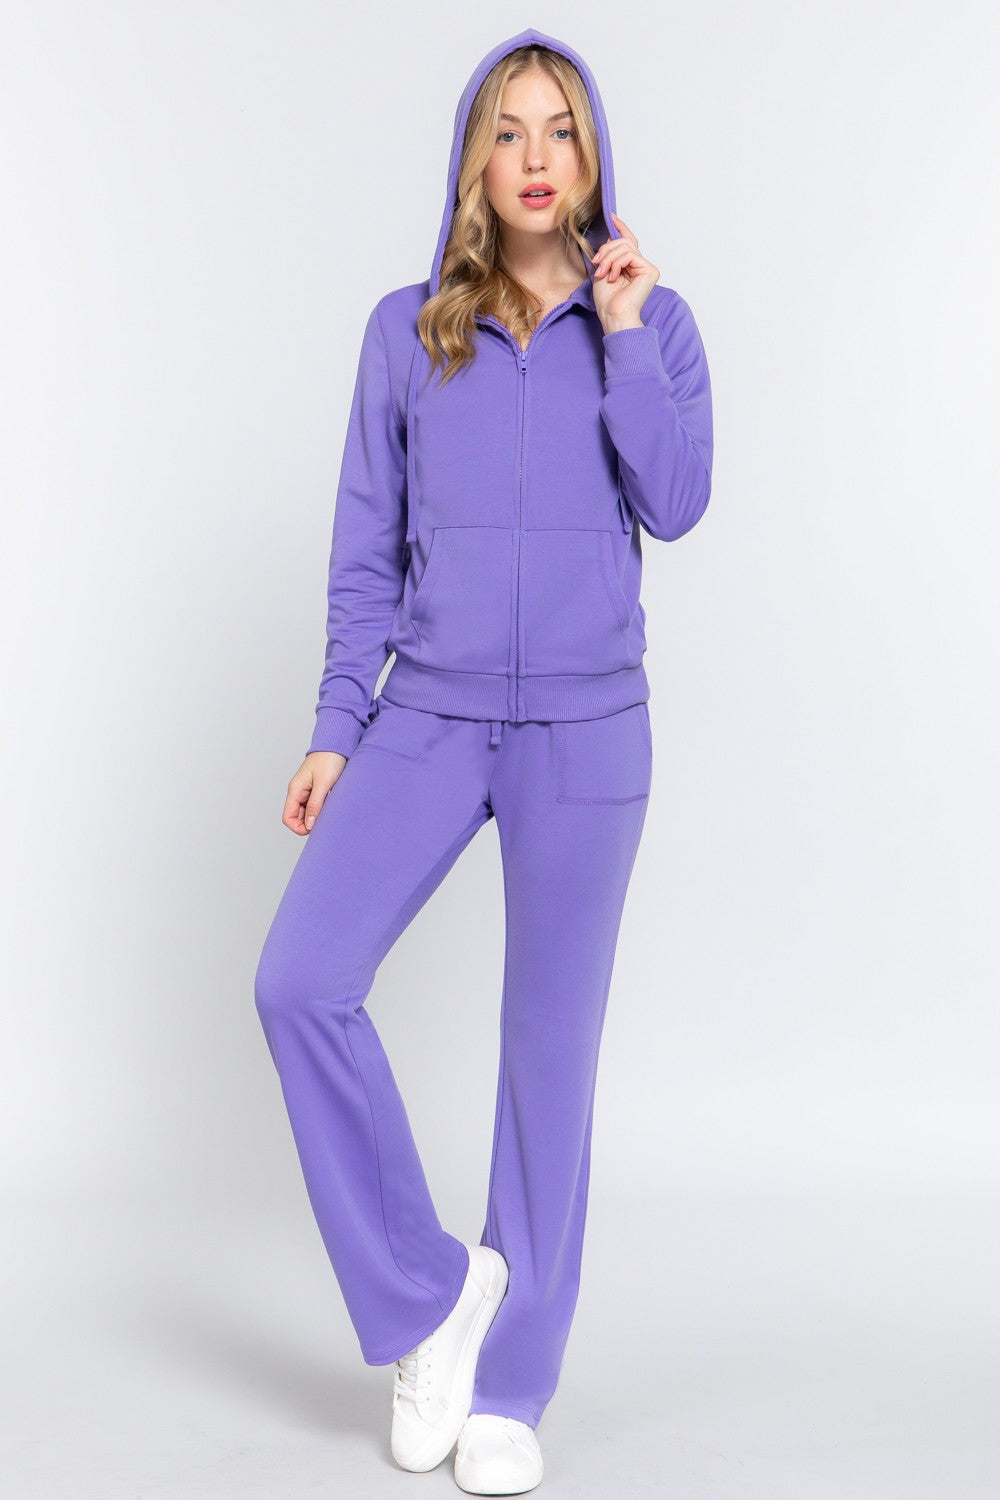 KESLEY Zip Up Hoodie and Drawstring Pants Outfit Set Women's Fashion Tracksuit